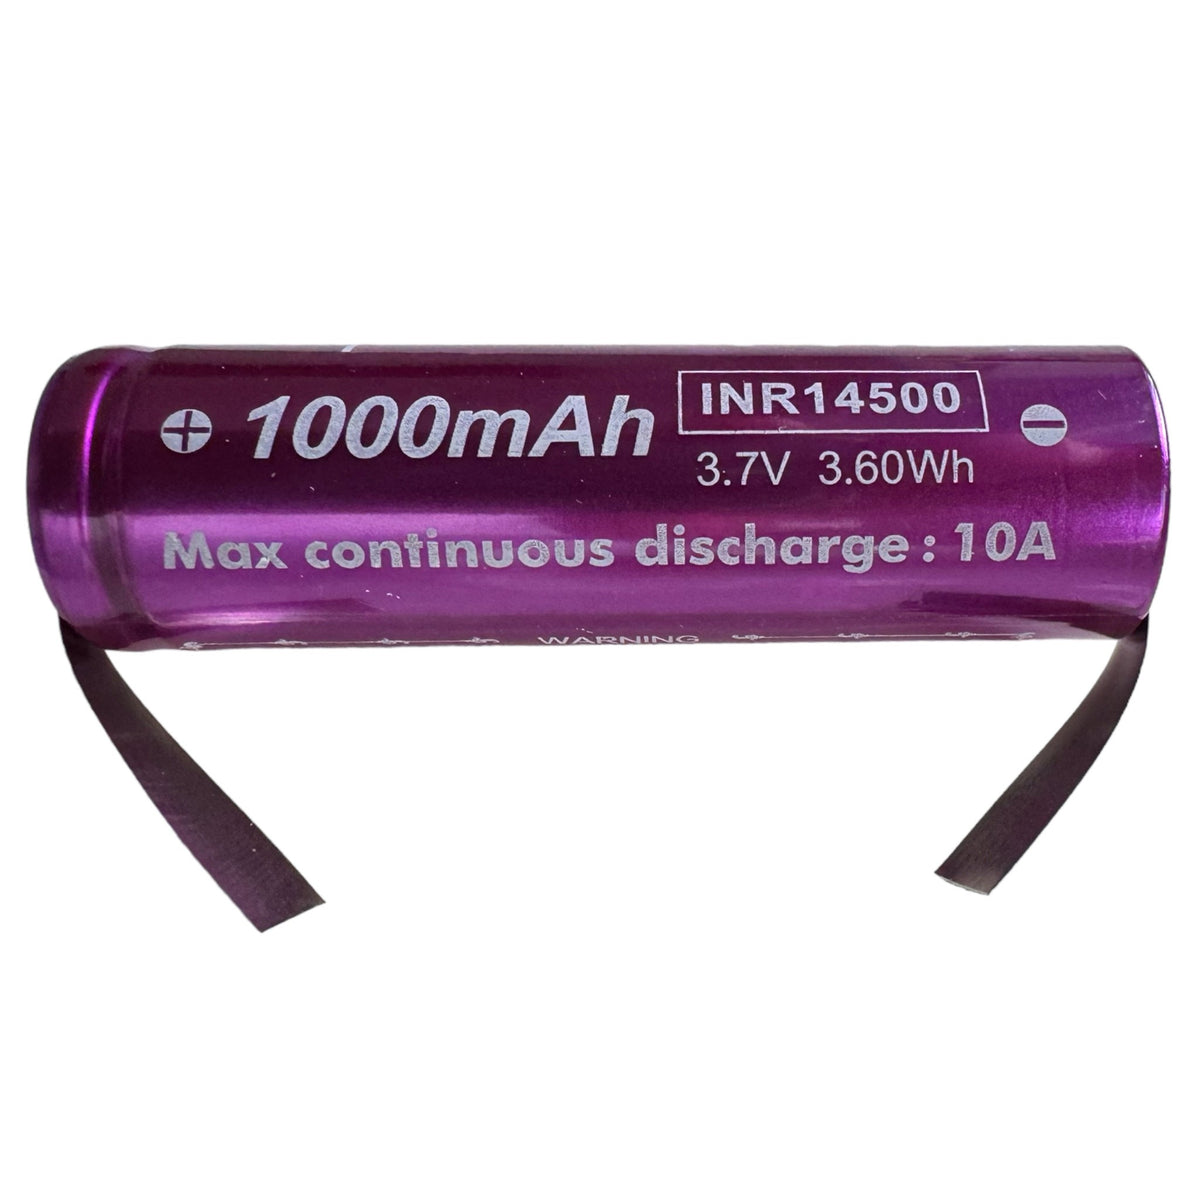 PHILIPS SHAVER REPLACEMENT BATTERY 1000MAH